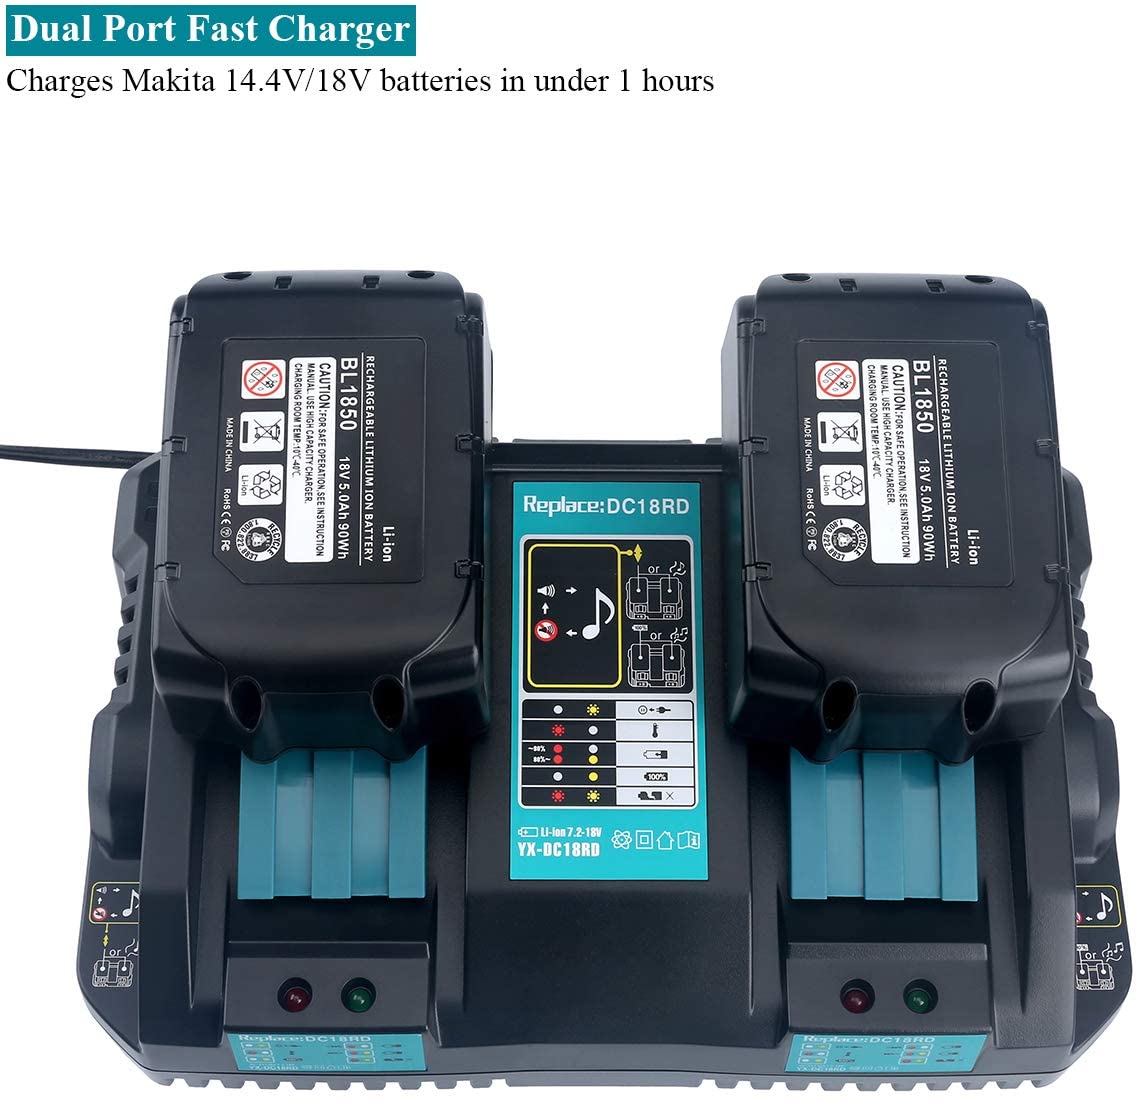 BL1850B Batterie Makita 18V 5Ah BL1830 LXT l i-ion BL1860 BL1840 DC18RD  Chargeur